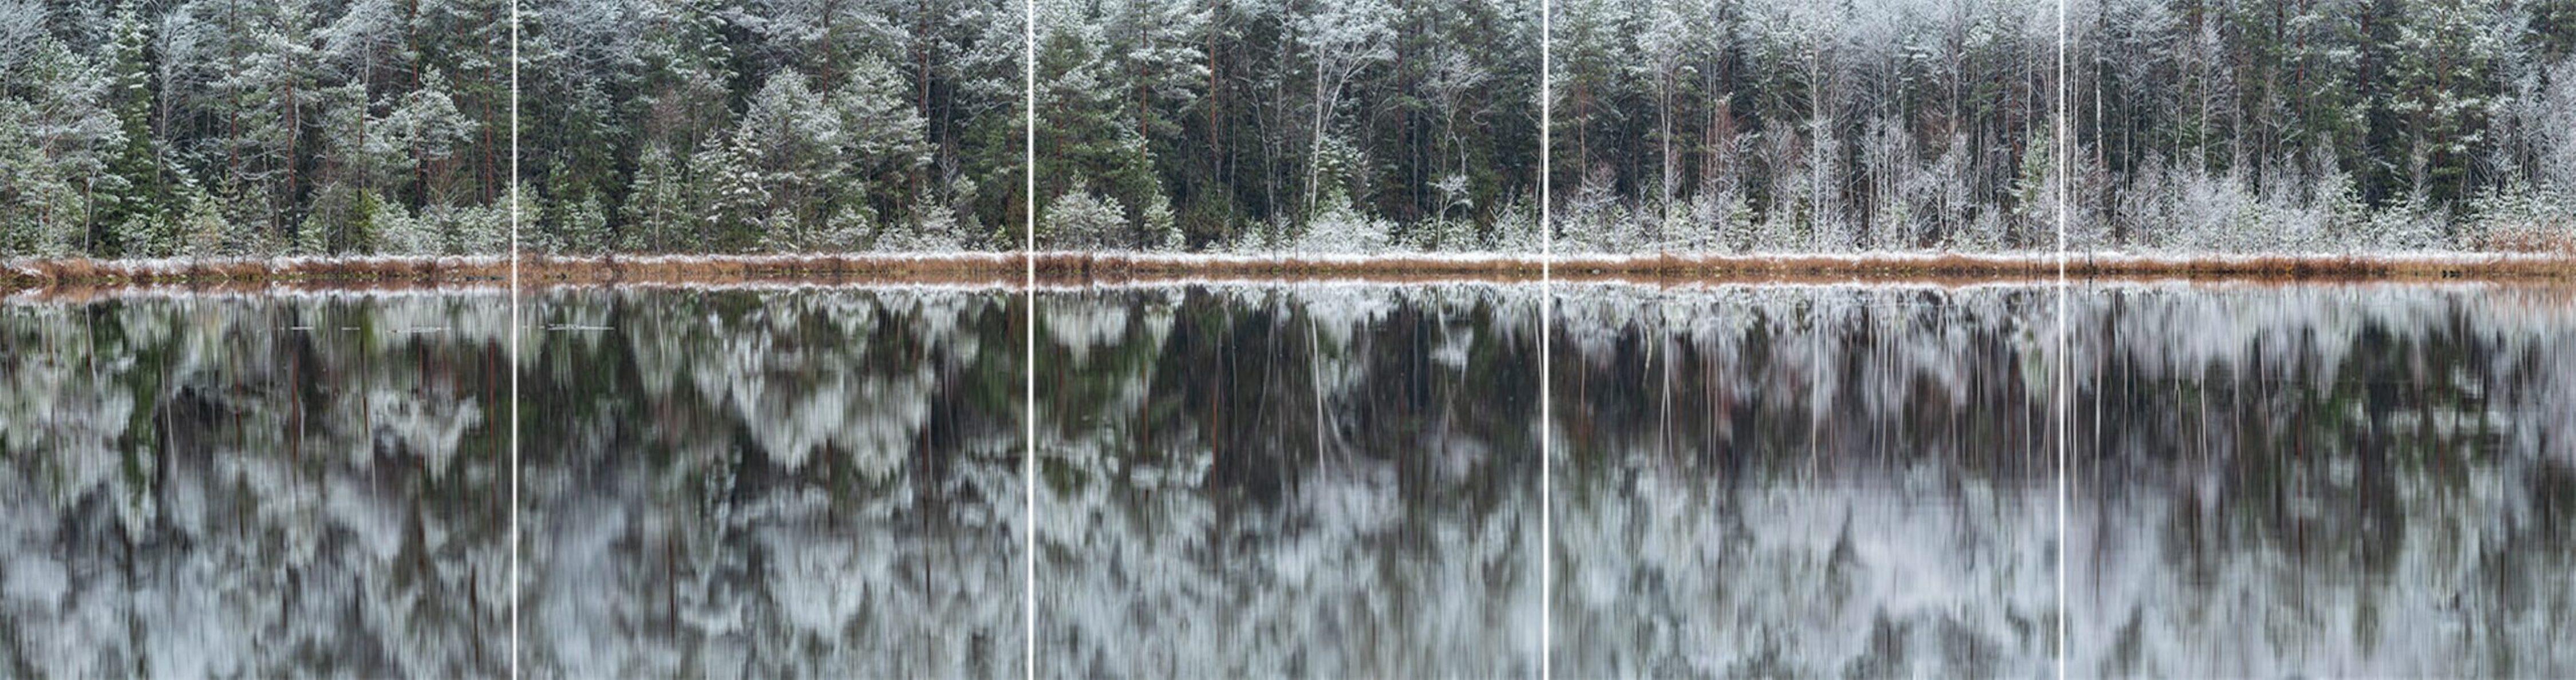 Deep Mirroring Forest 007 by Bernhard Lang - Landscape photography, trees, snowy For Sale 1